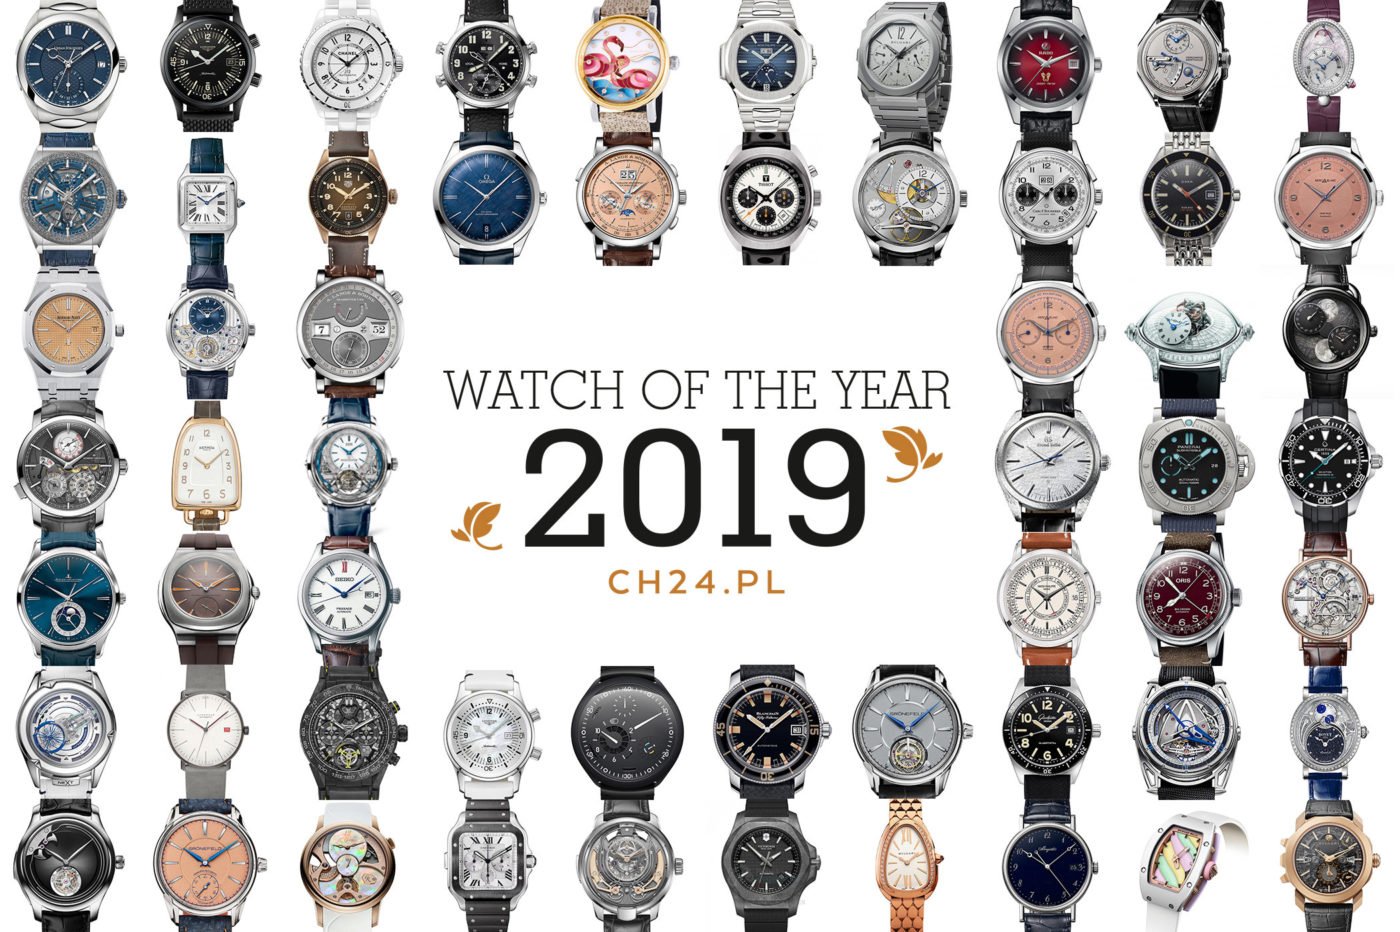 Watch of The Year 2019 – 10th anniversary(!)